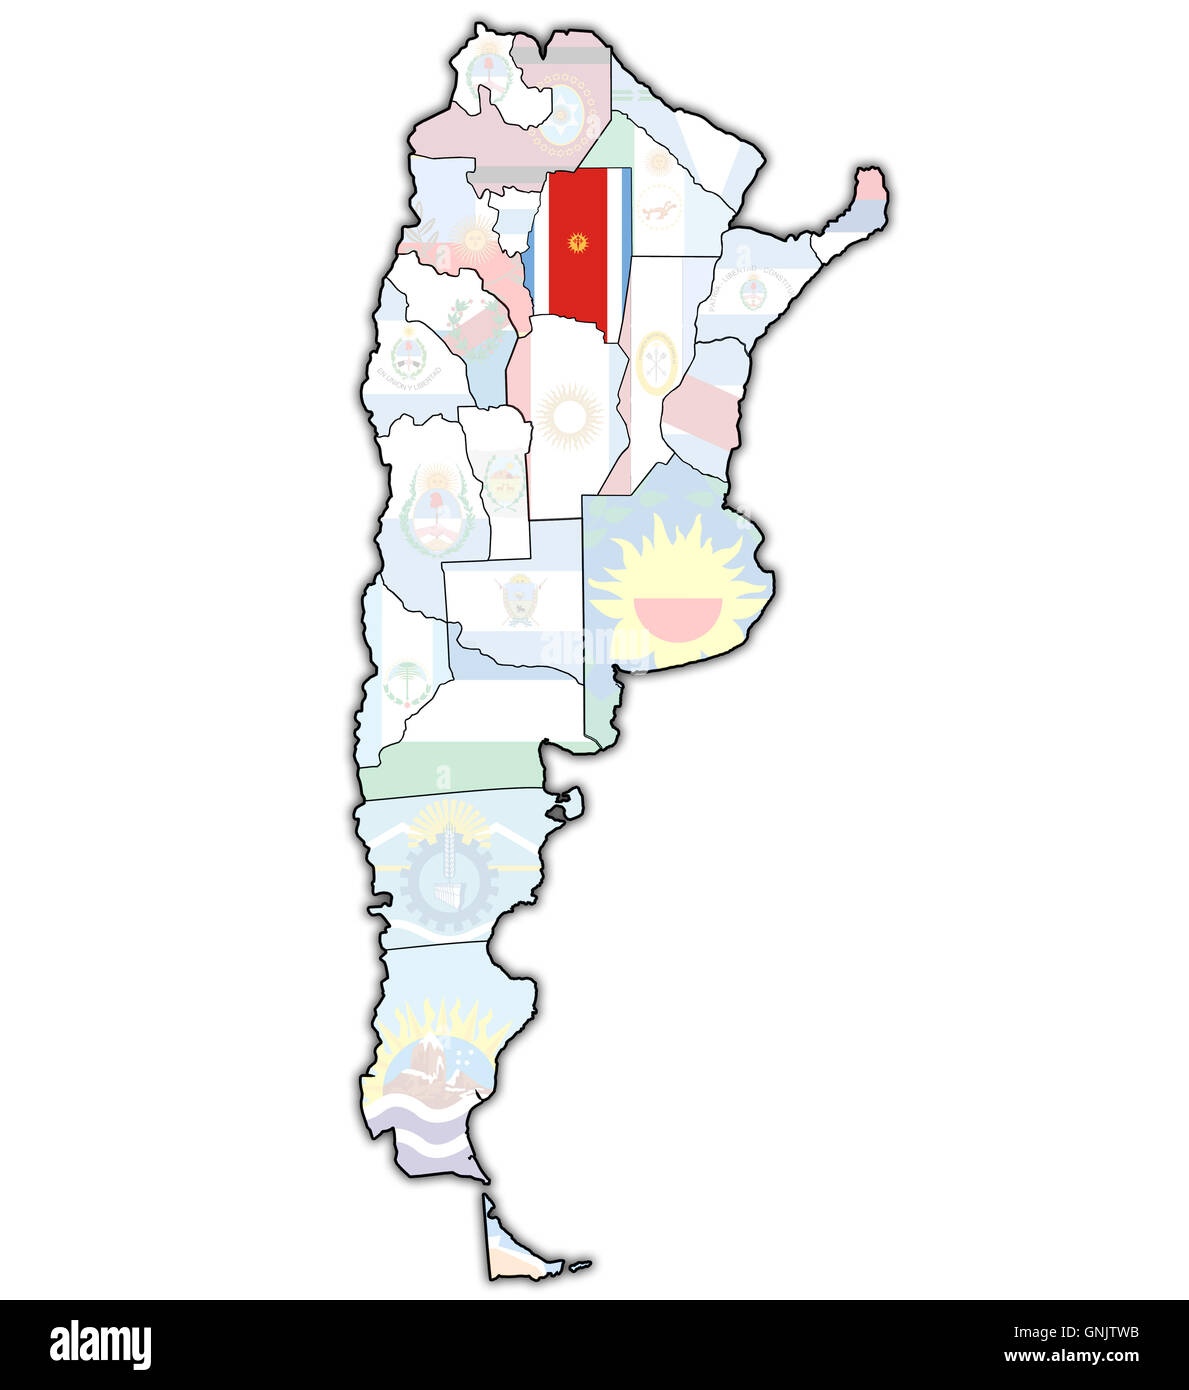 Santiago del Estero region with flag on map of administrative divisions of argentina Stock Photo